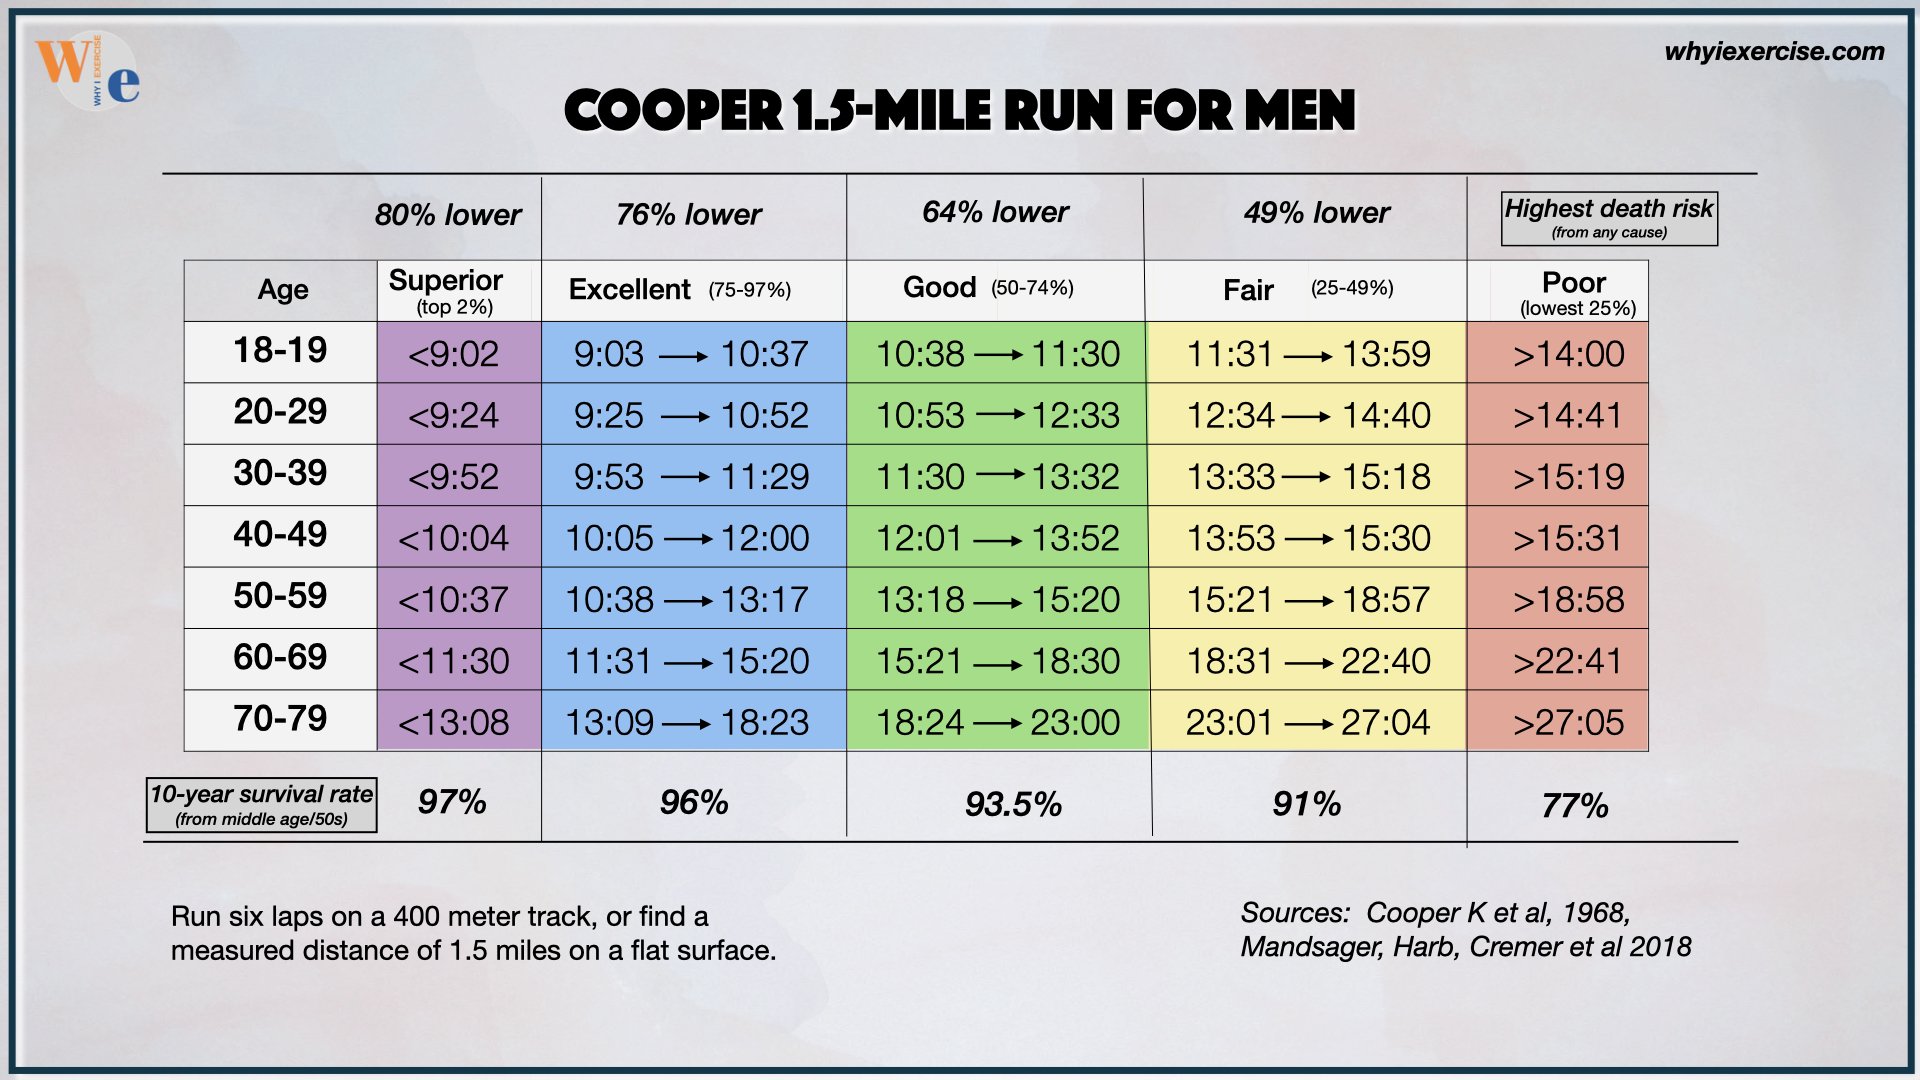 Cooper 1.5-mile run score chart for men by age group